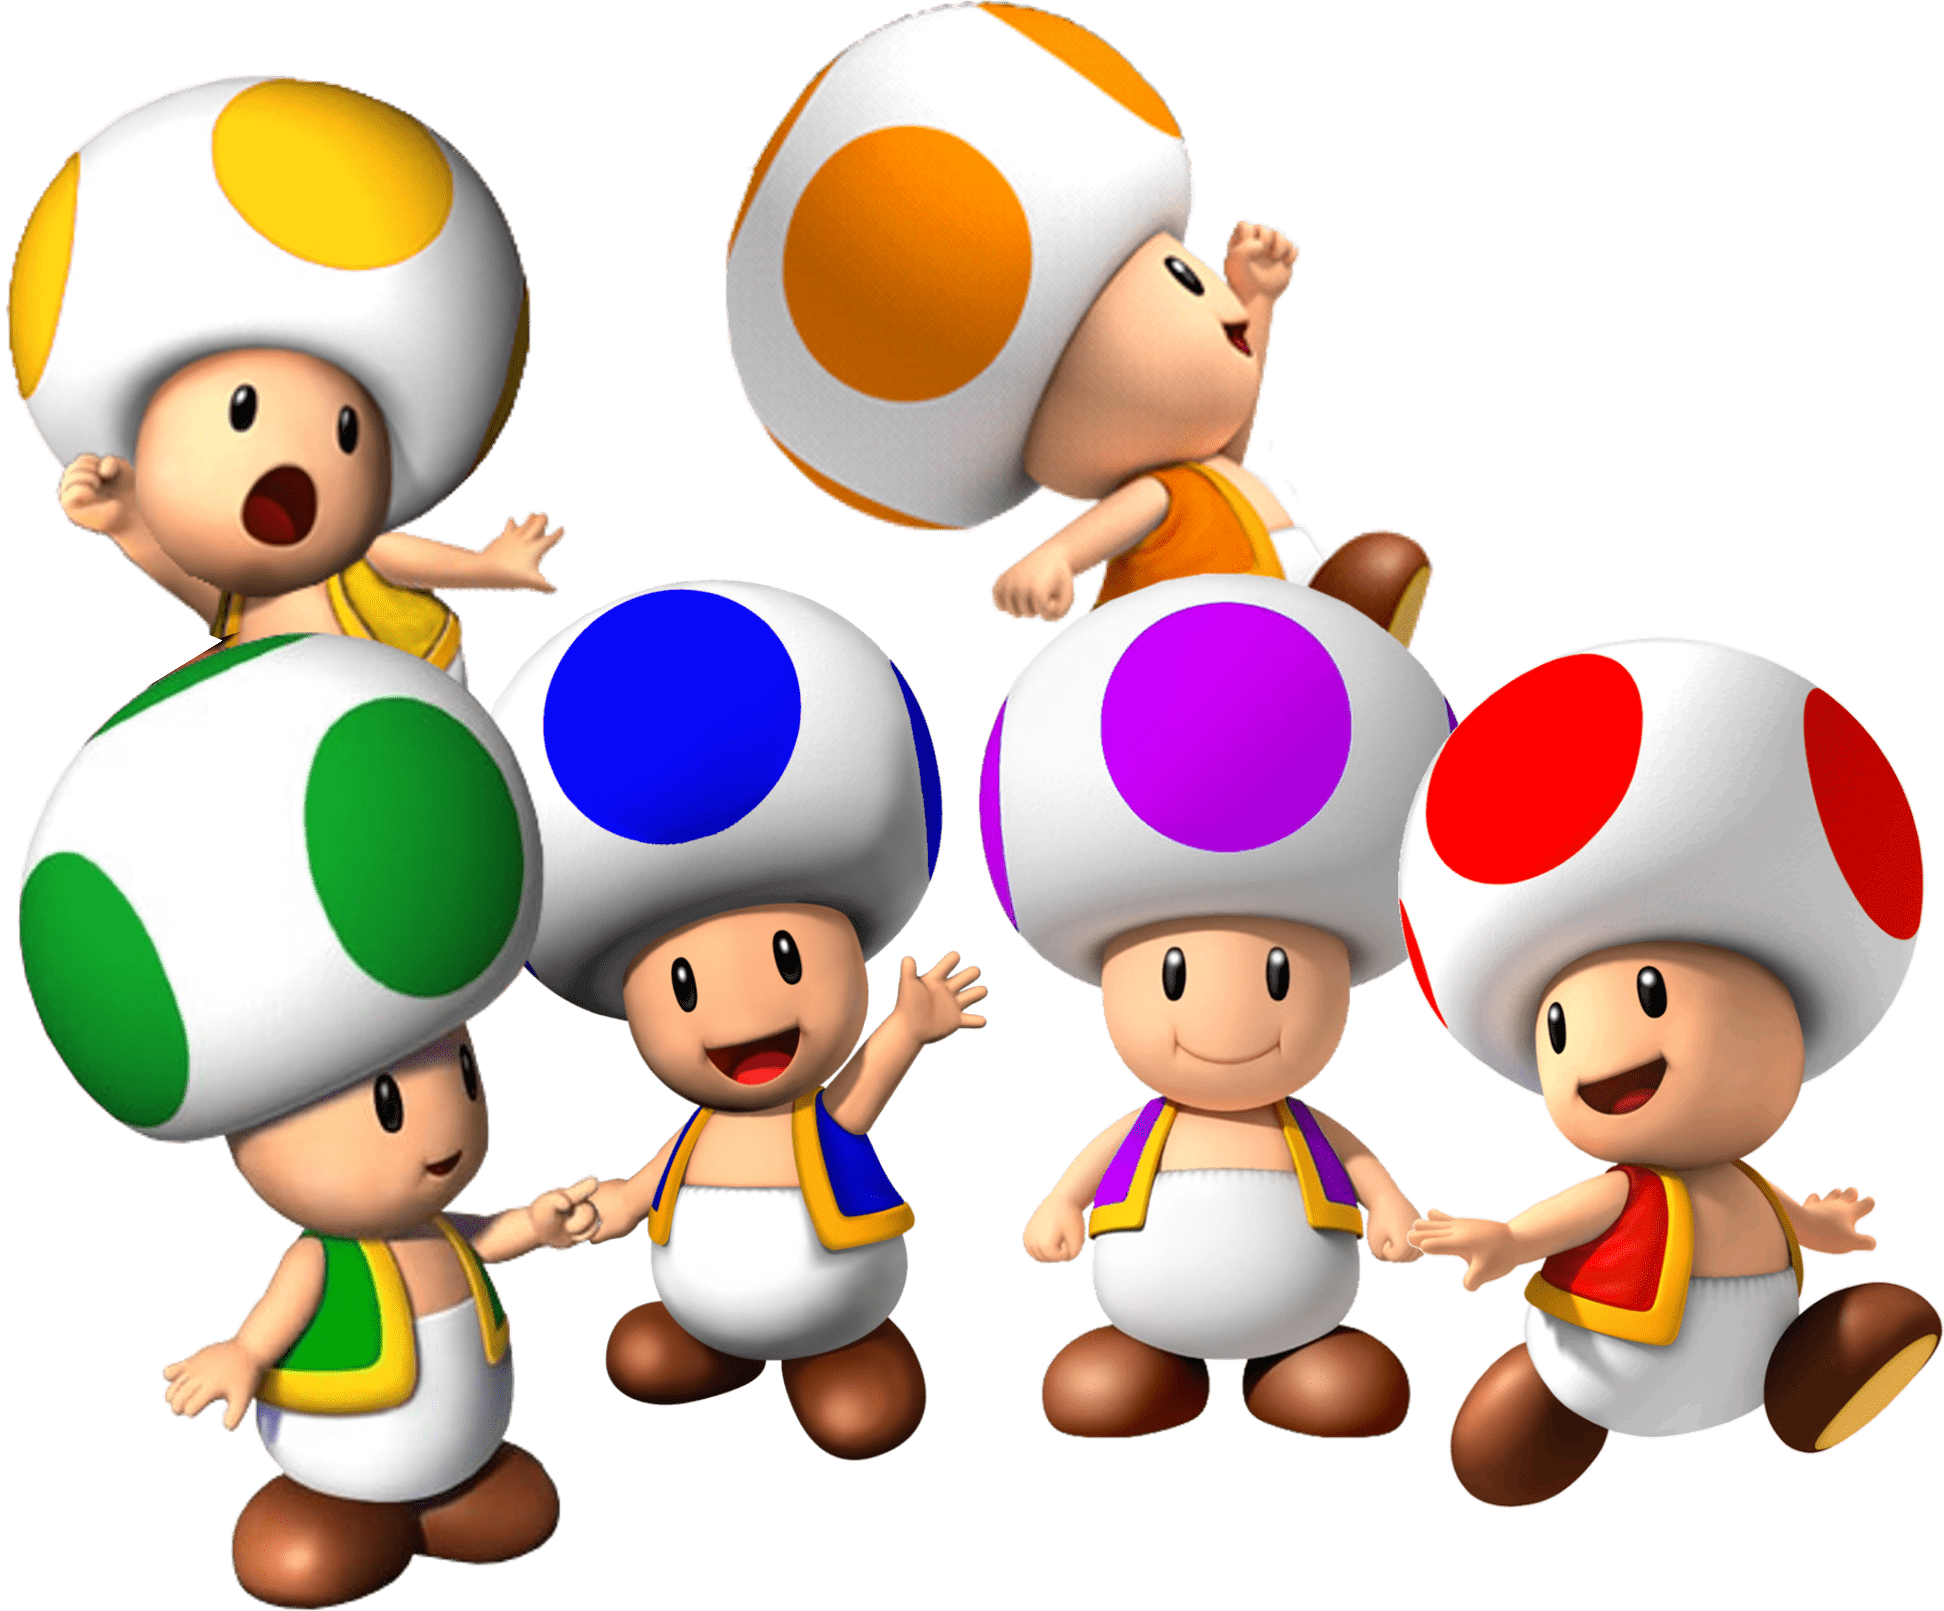 Toad Super Mario Wallpapers Top Free Toad Super Mario Backgrounds Wallpaperaccess 1459